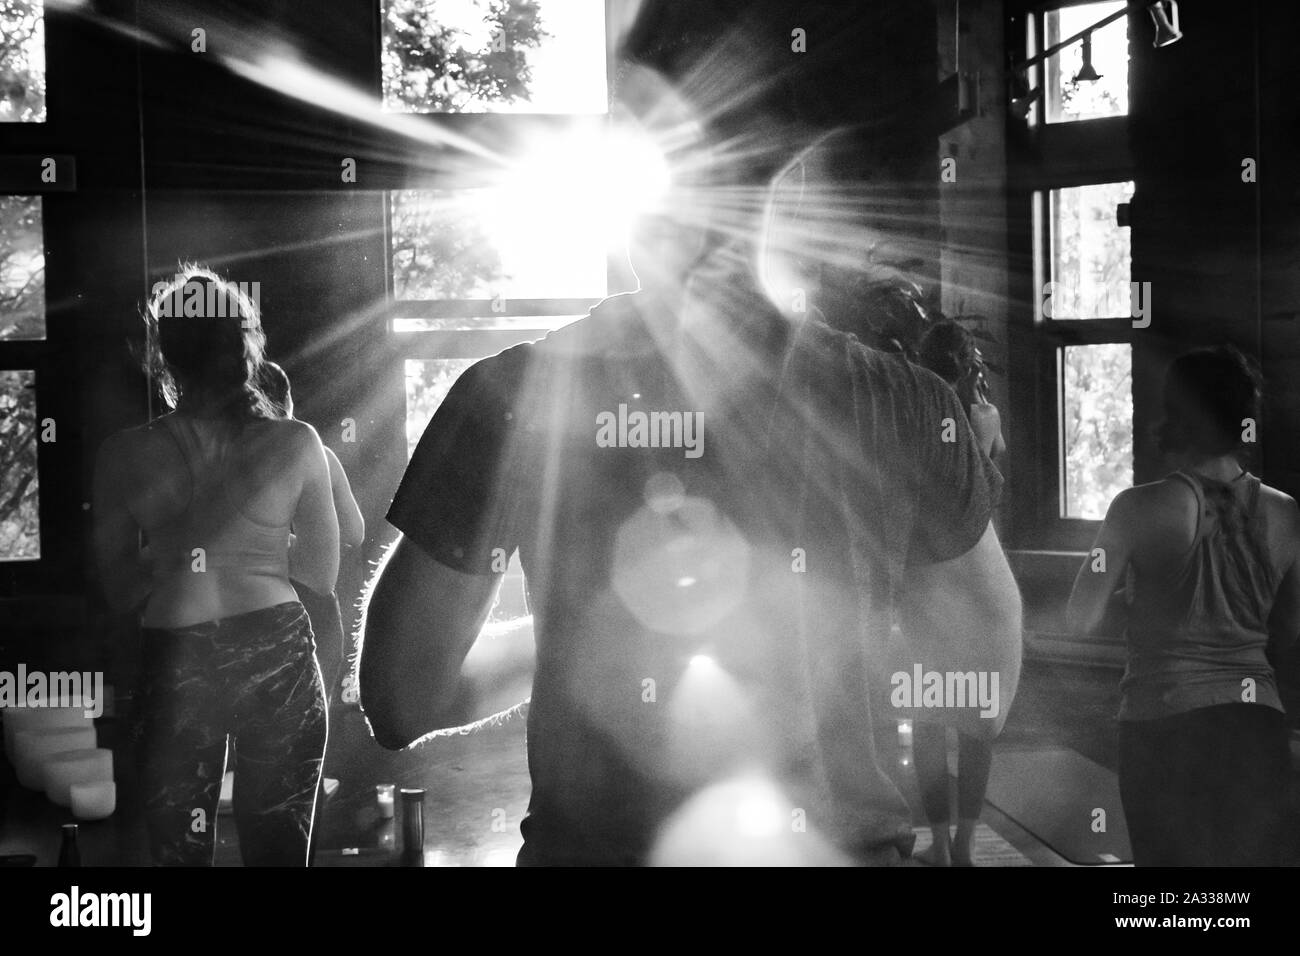 A black and white view from the rear of a gymnasium during a popular yogic session of 108 sun salutations, performed during summer & winter solstice. Stock Photo